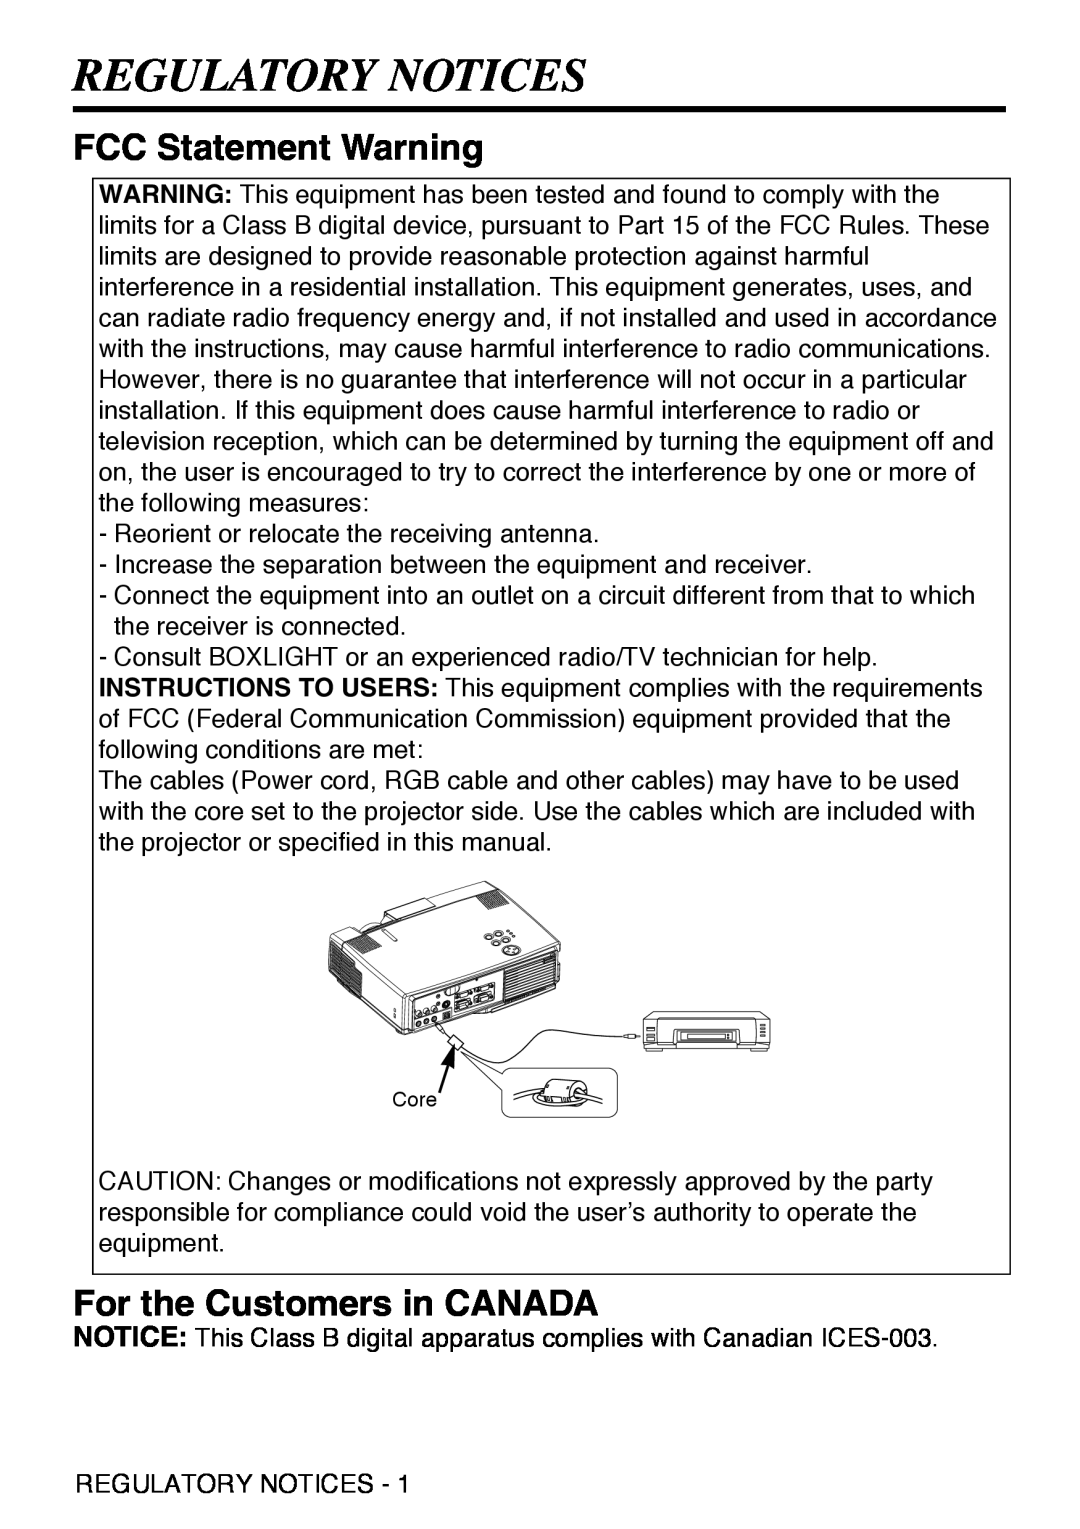 Grundig CP-731i user manual Regulatory Notices, FCC Statement Warning, For the Customers in CANADA 